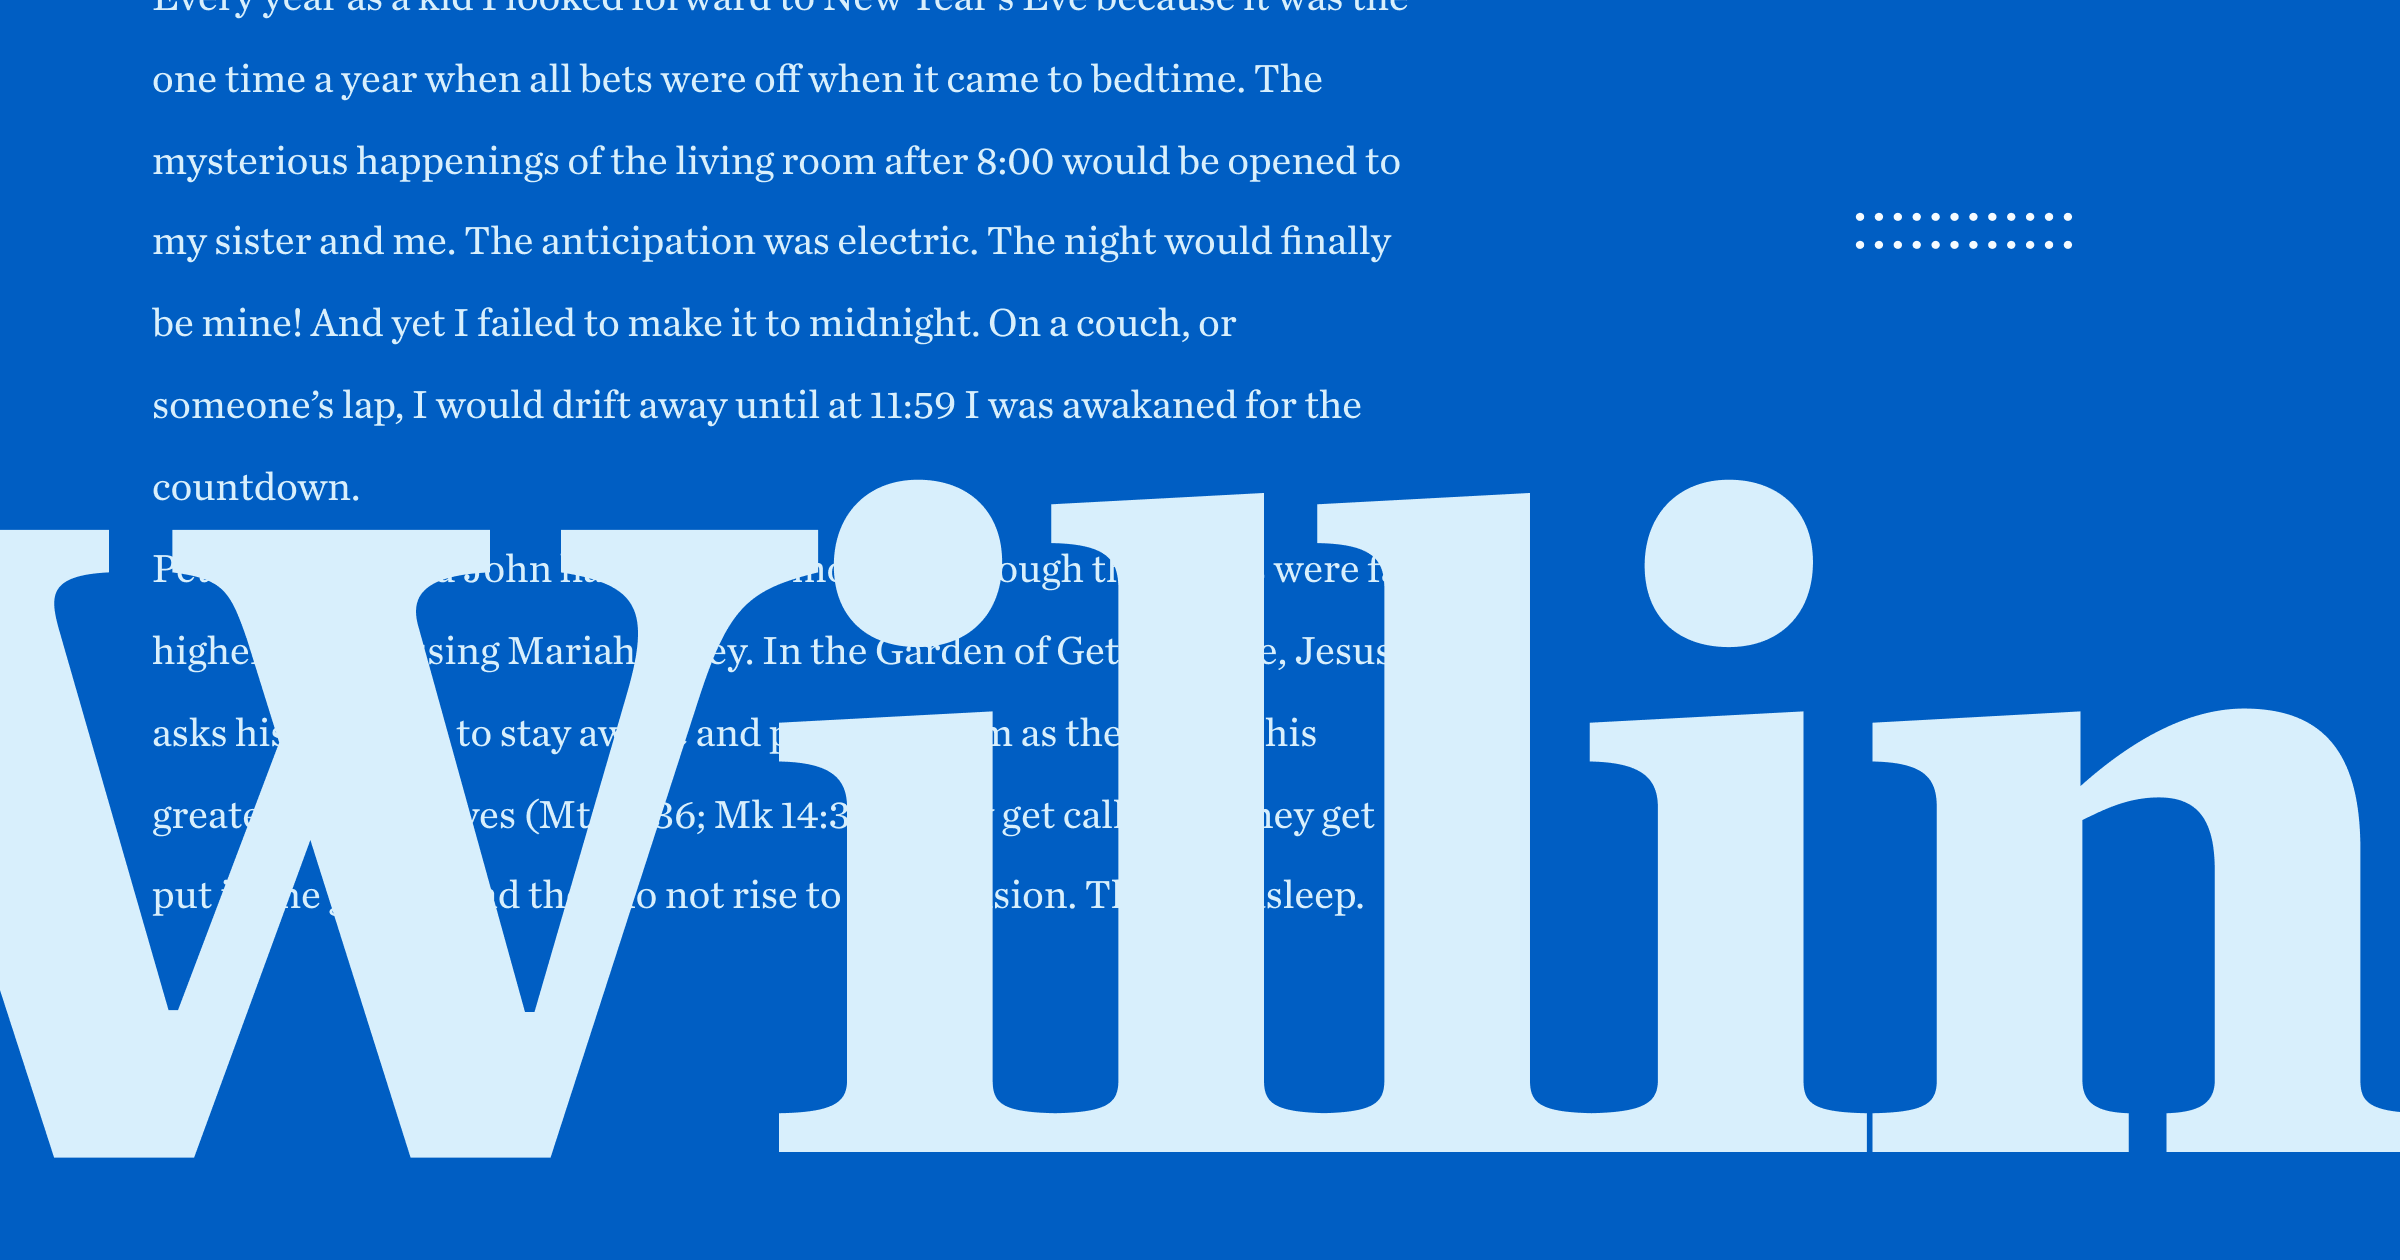 Graphic with the word "willing" prominent and text from the article in the background.